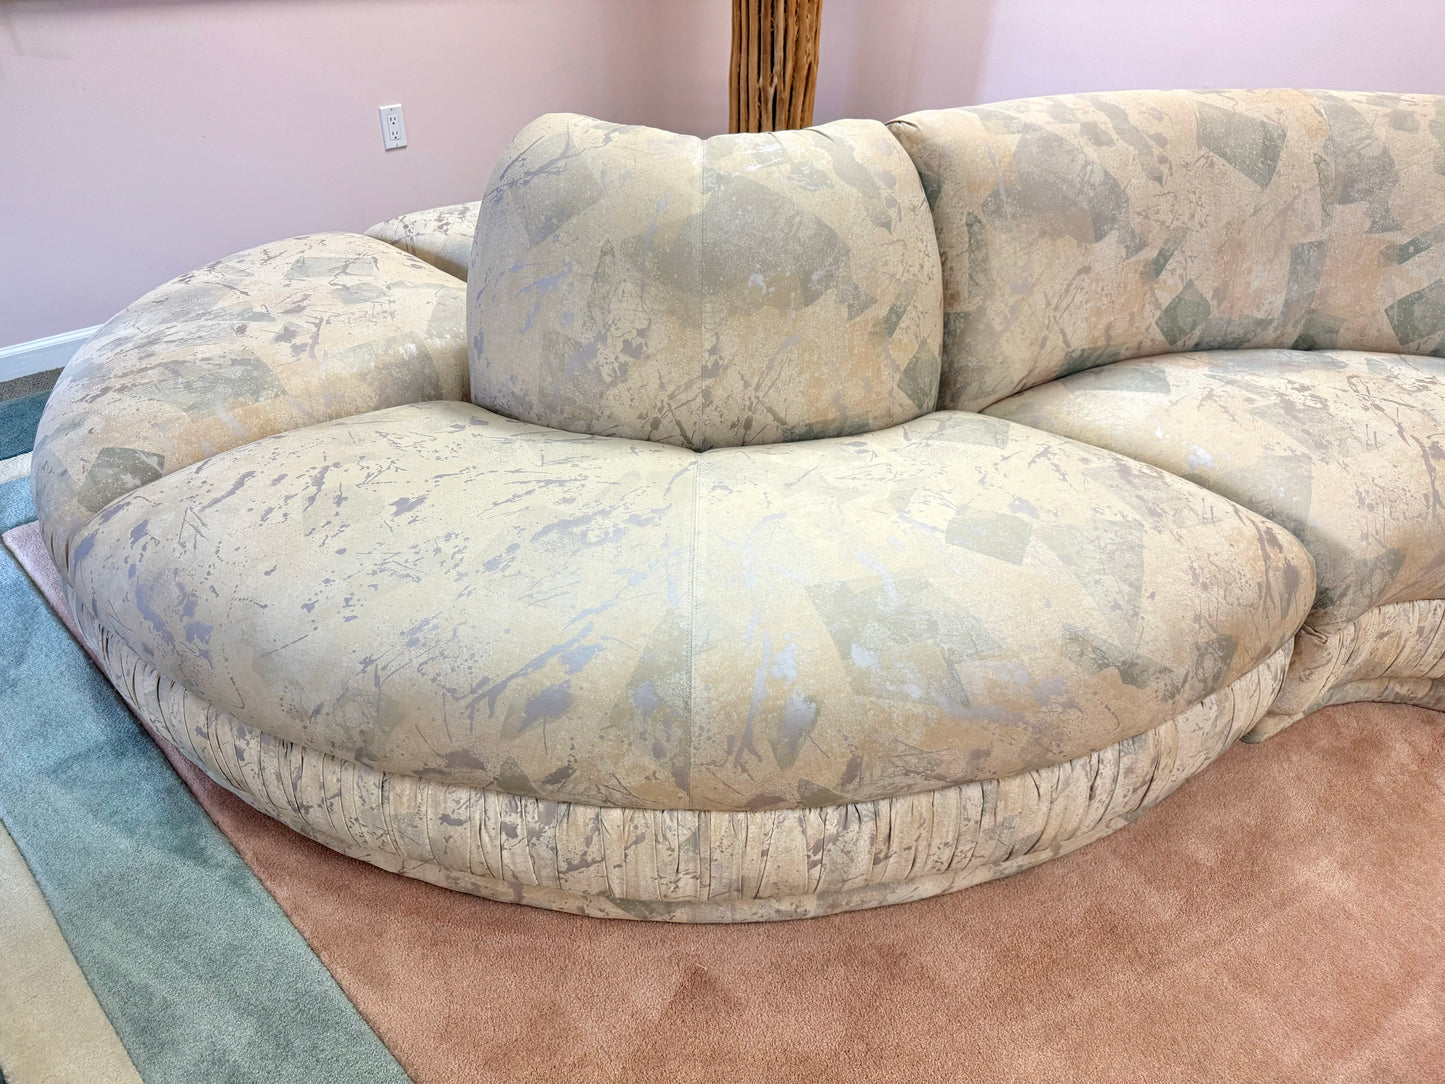 1980’s Preview Style 5 Piece Curved Serpentine Sectional Sofa